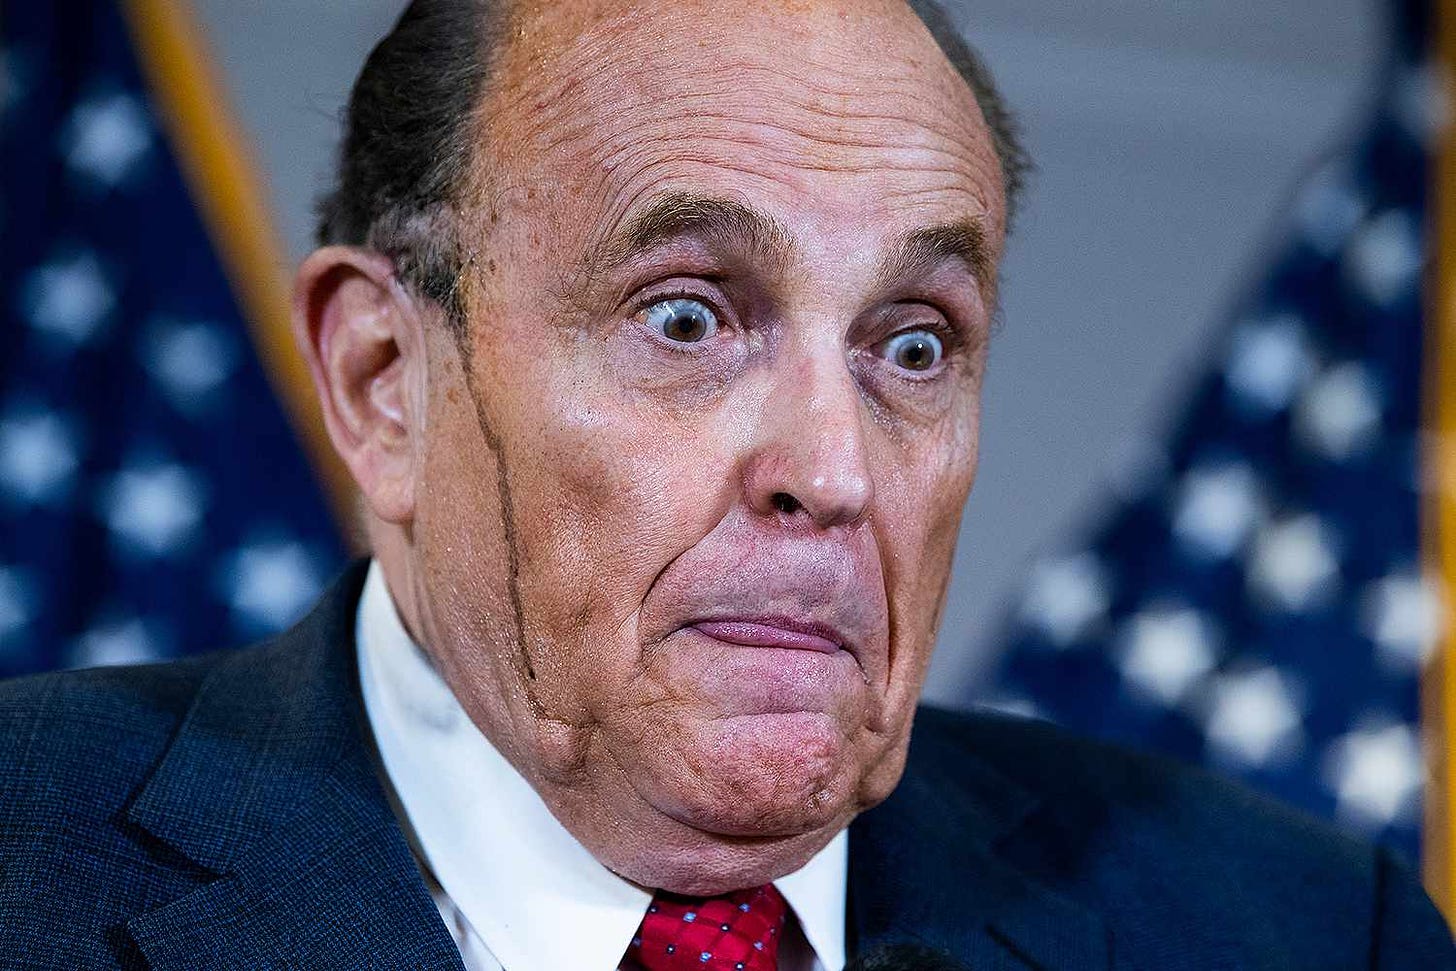 Rudy Giuliani's Hair Dye Seems to Sweat Off in Presser After Court Hearing